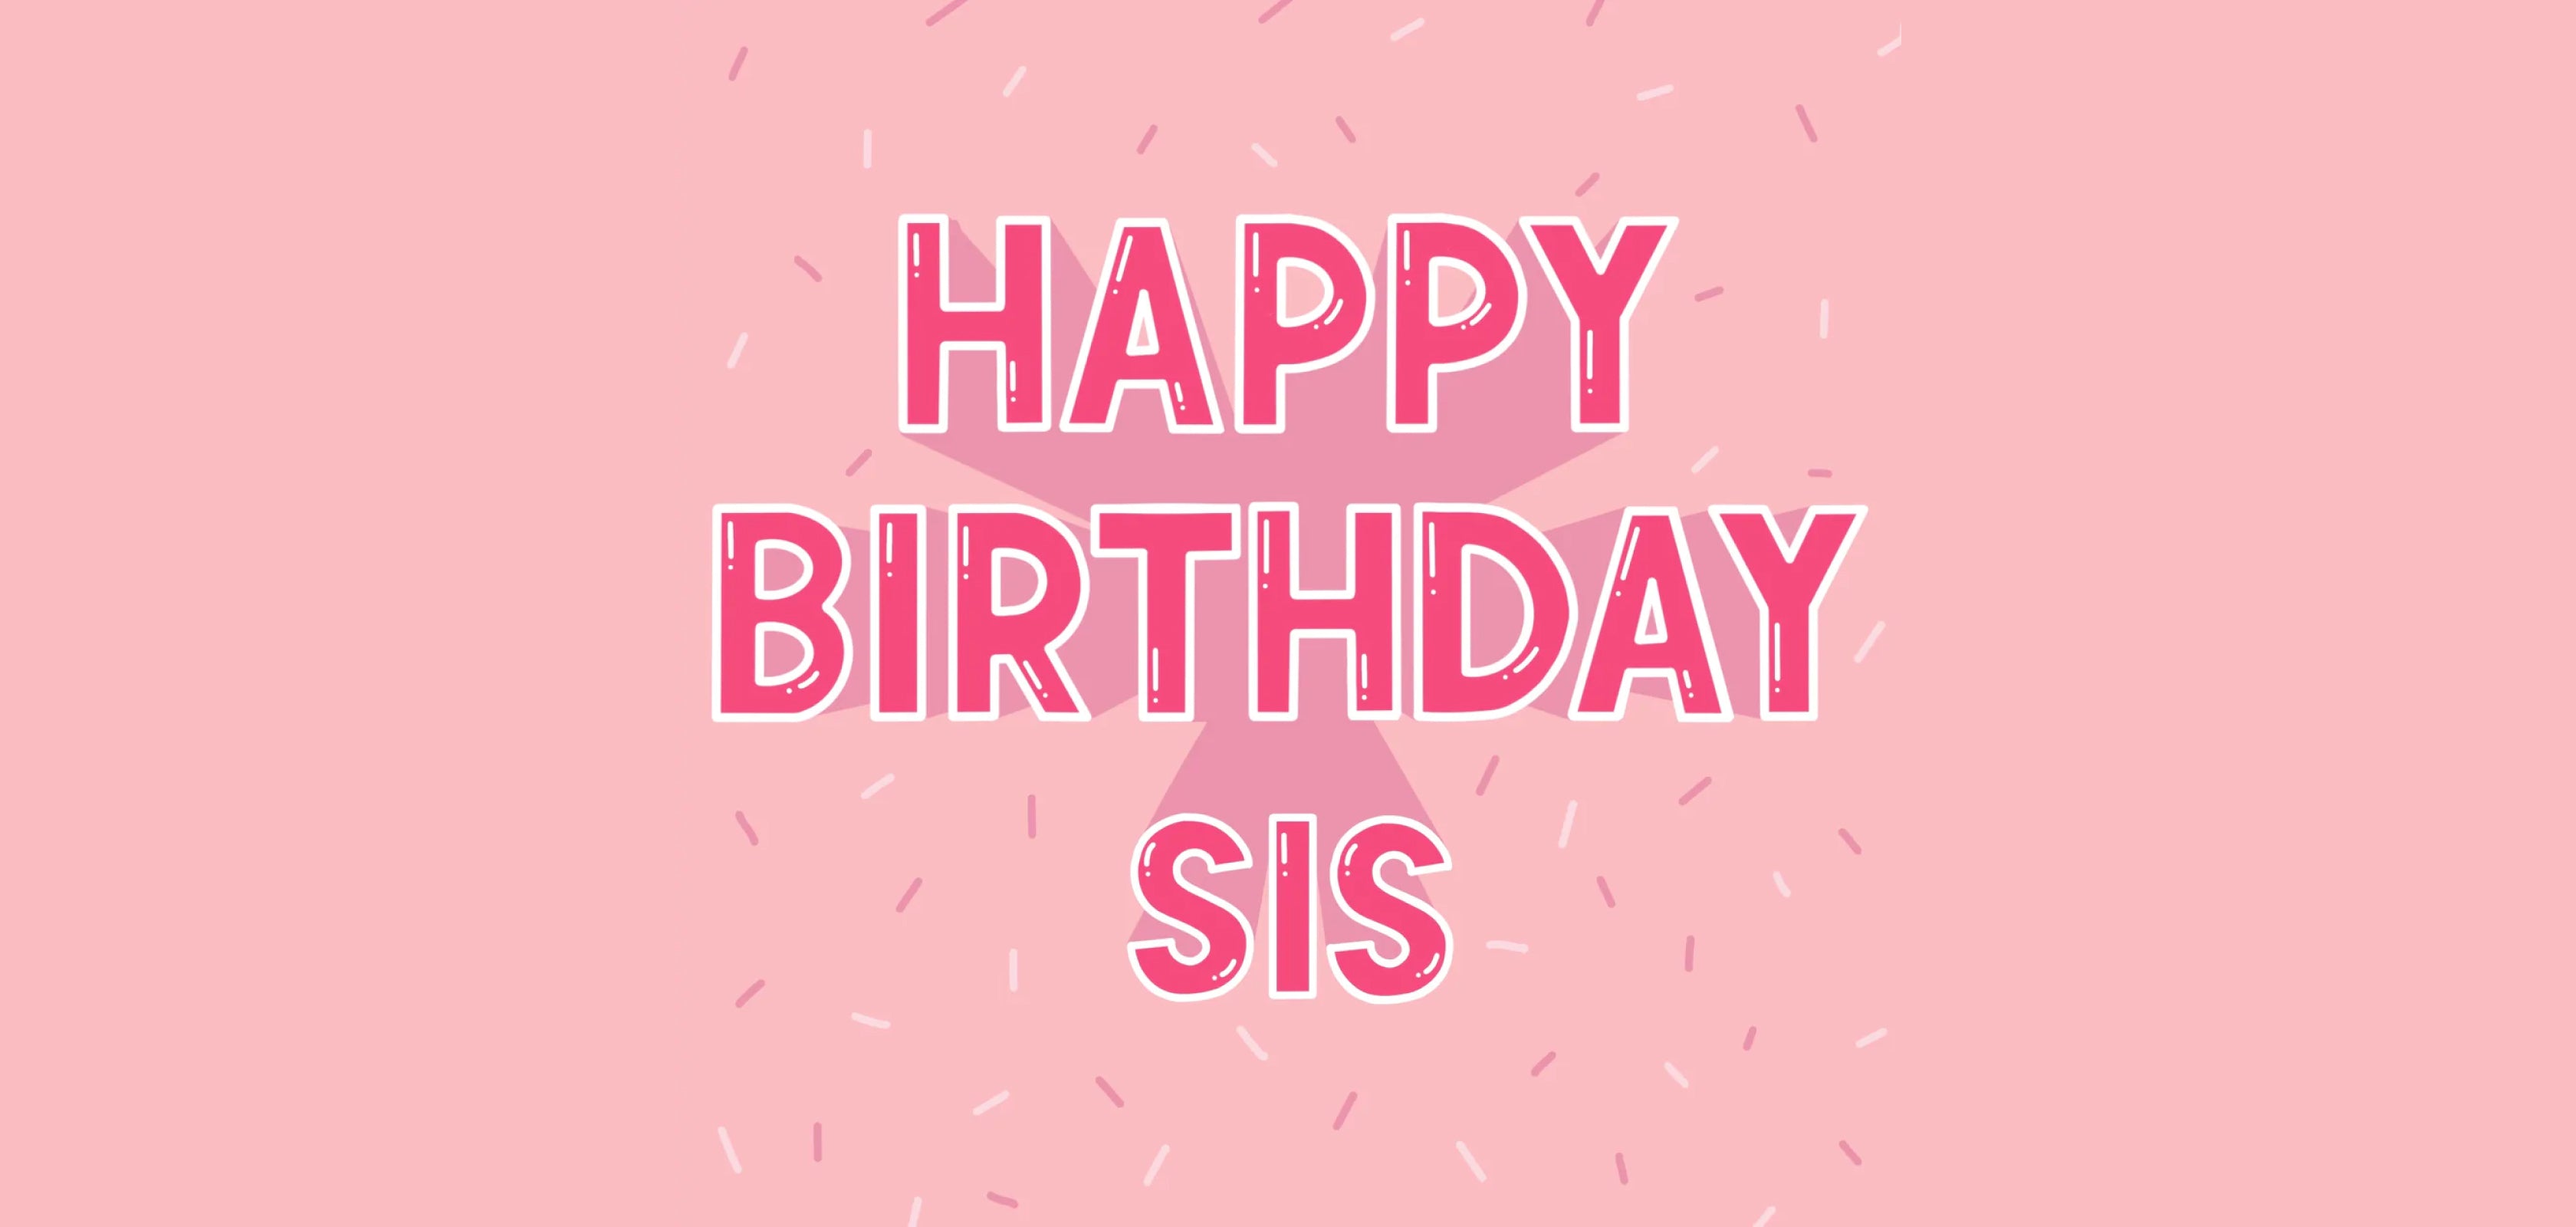 happy birthday sister images photos